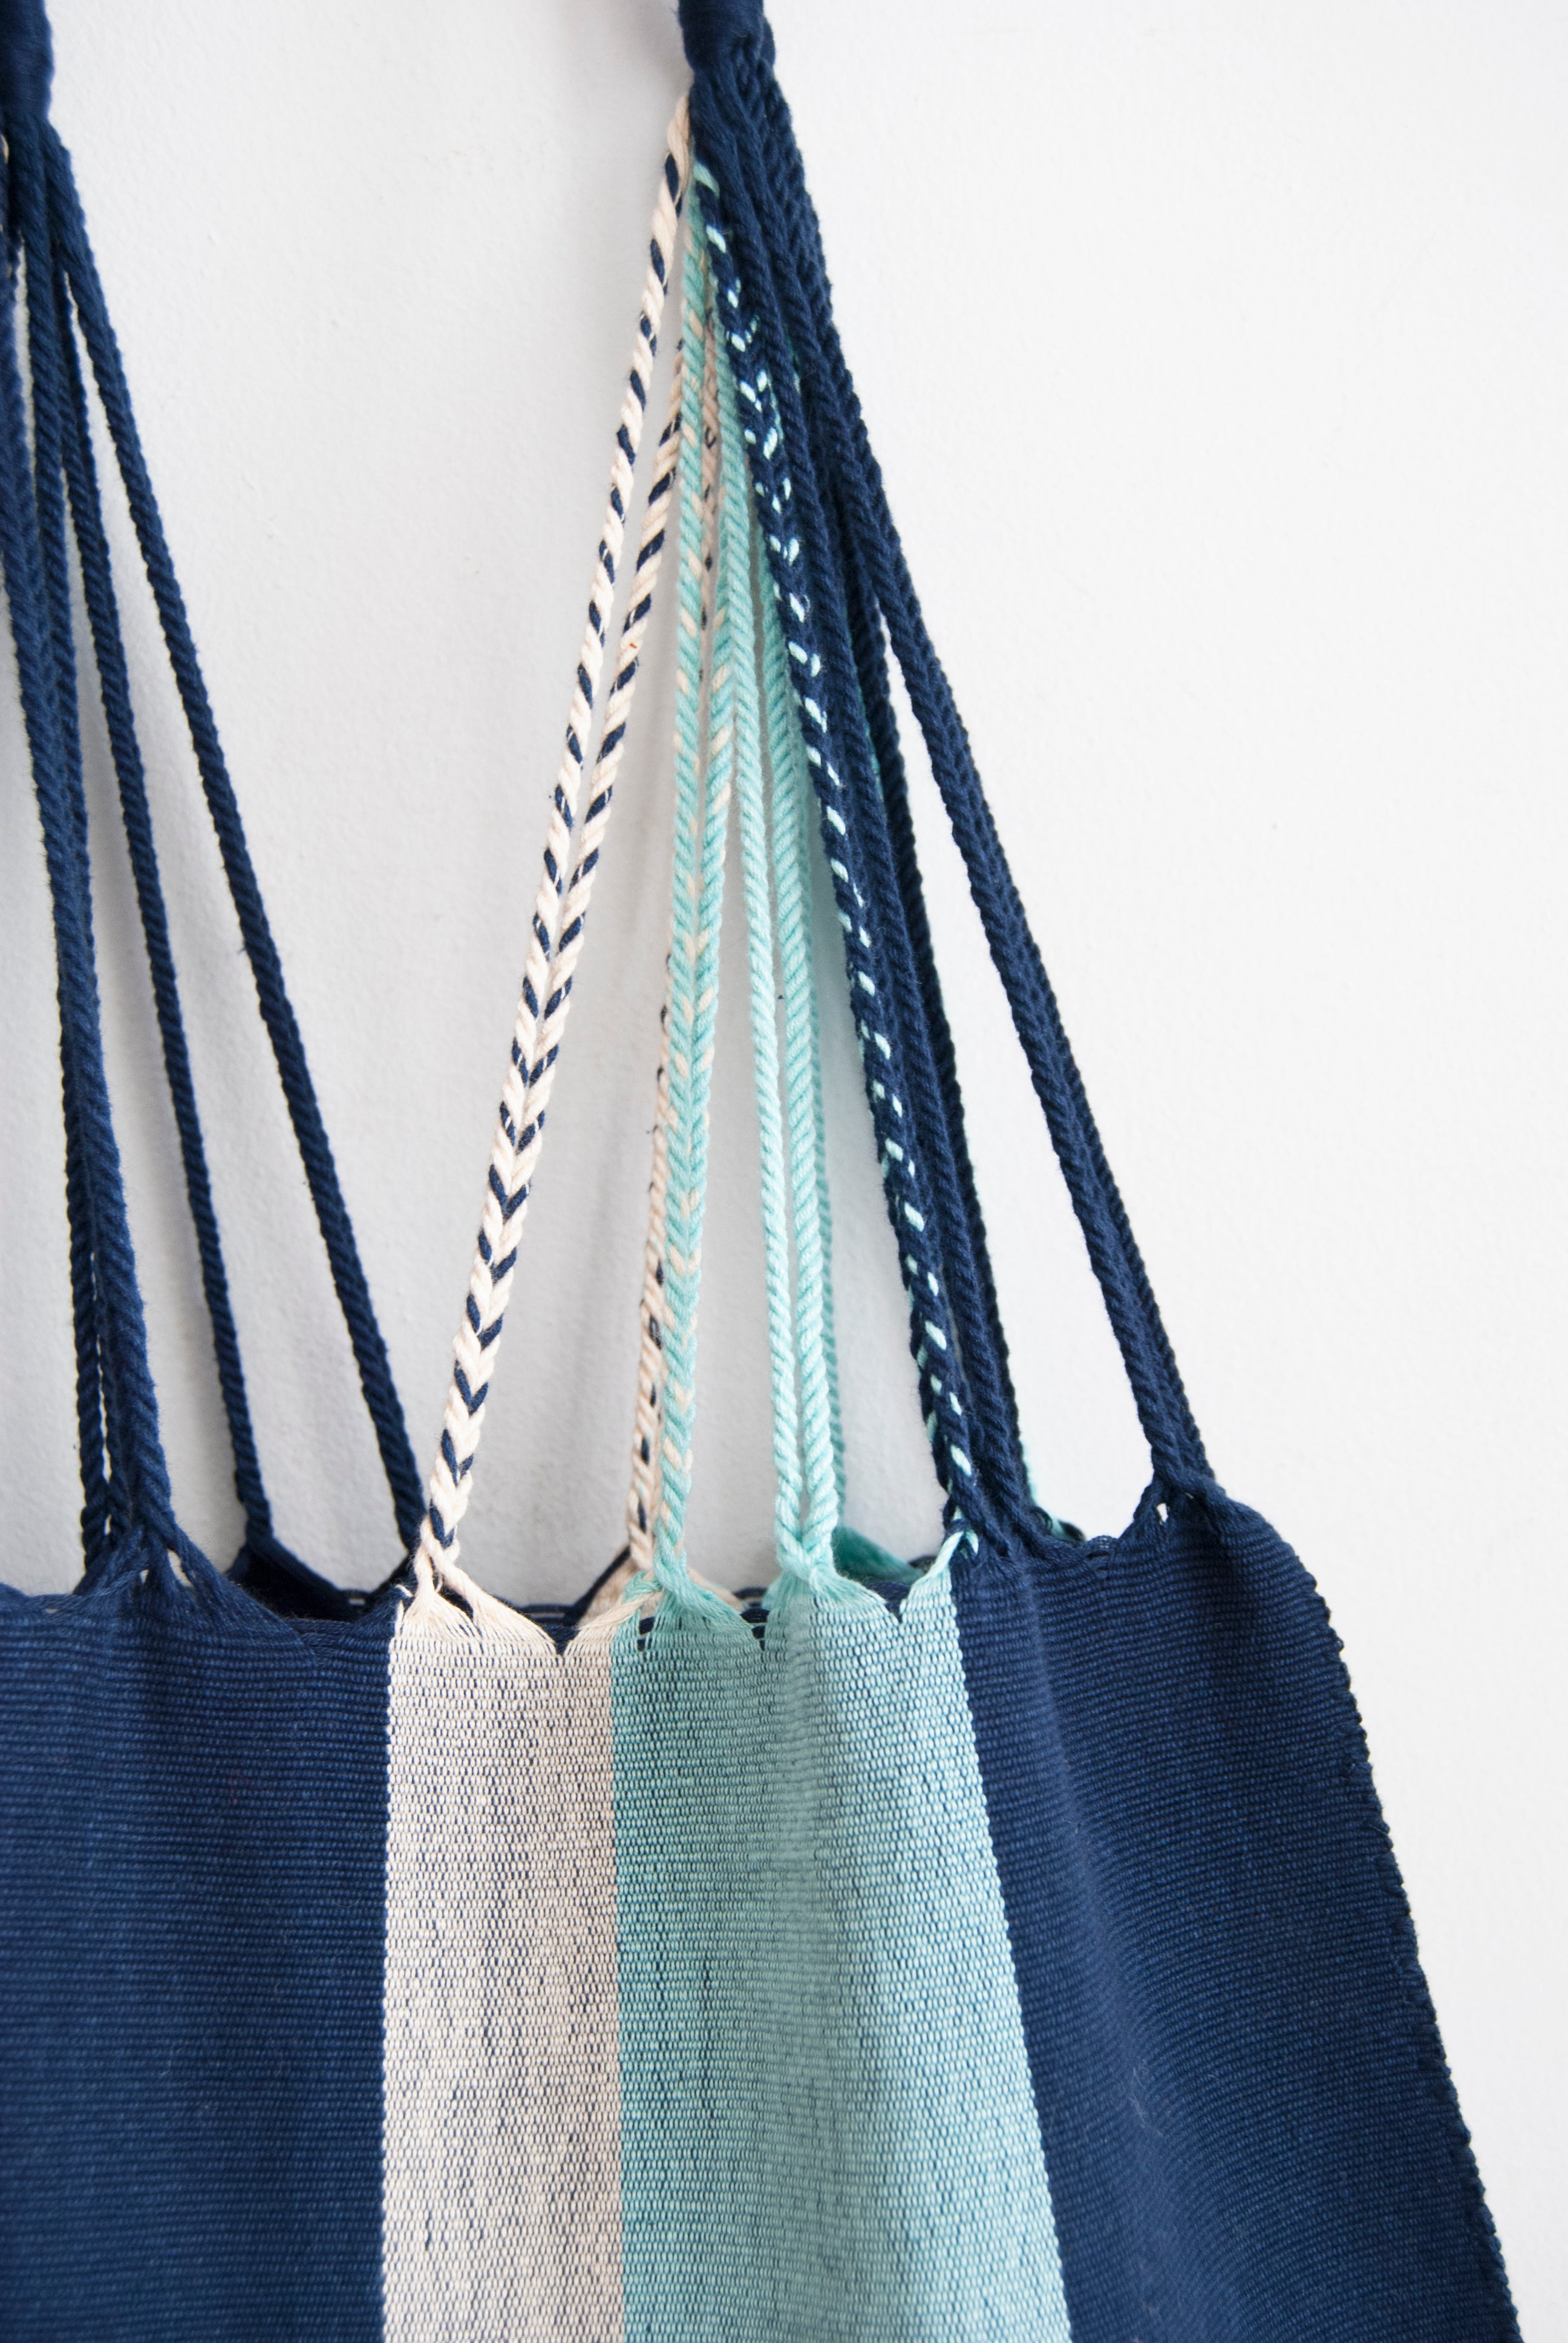 Detail showing tight weave of tote bag with vertical navy, white, and light blue stripes and braided straps.